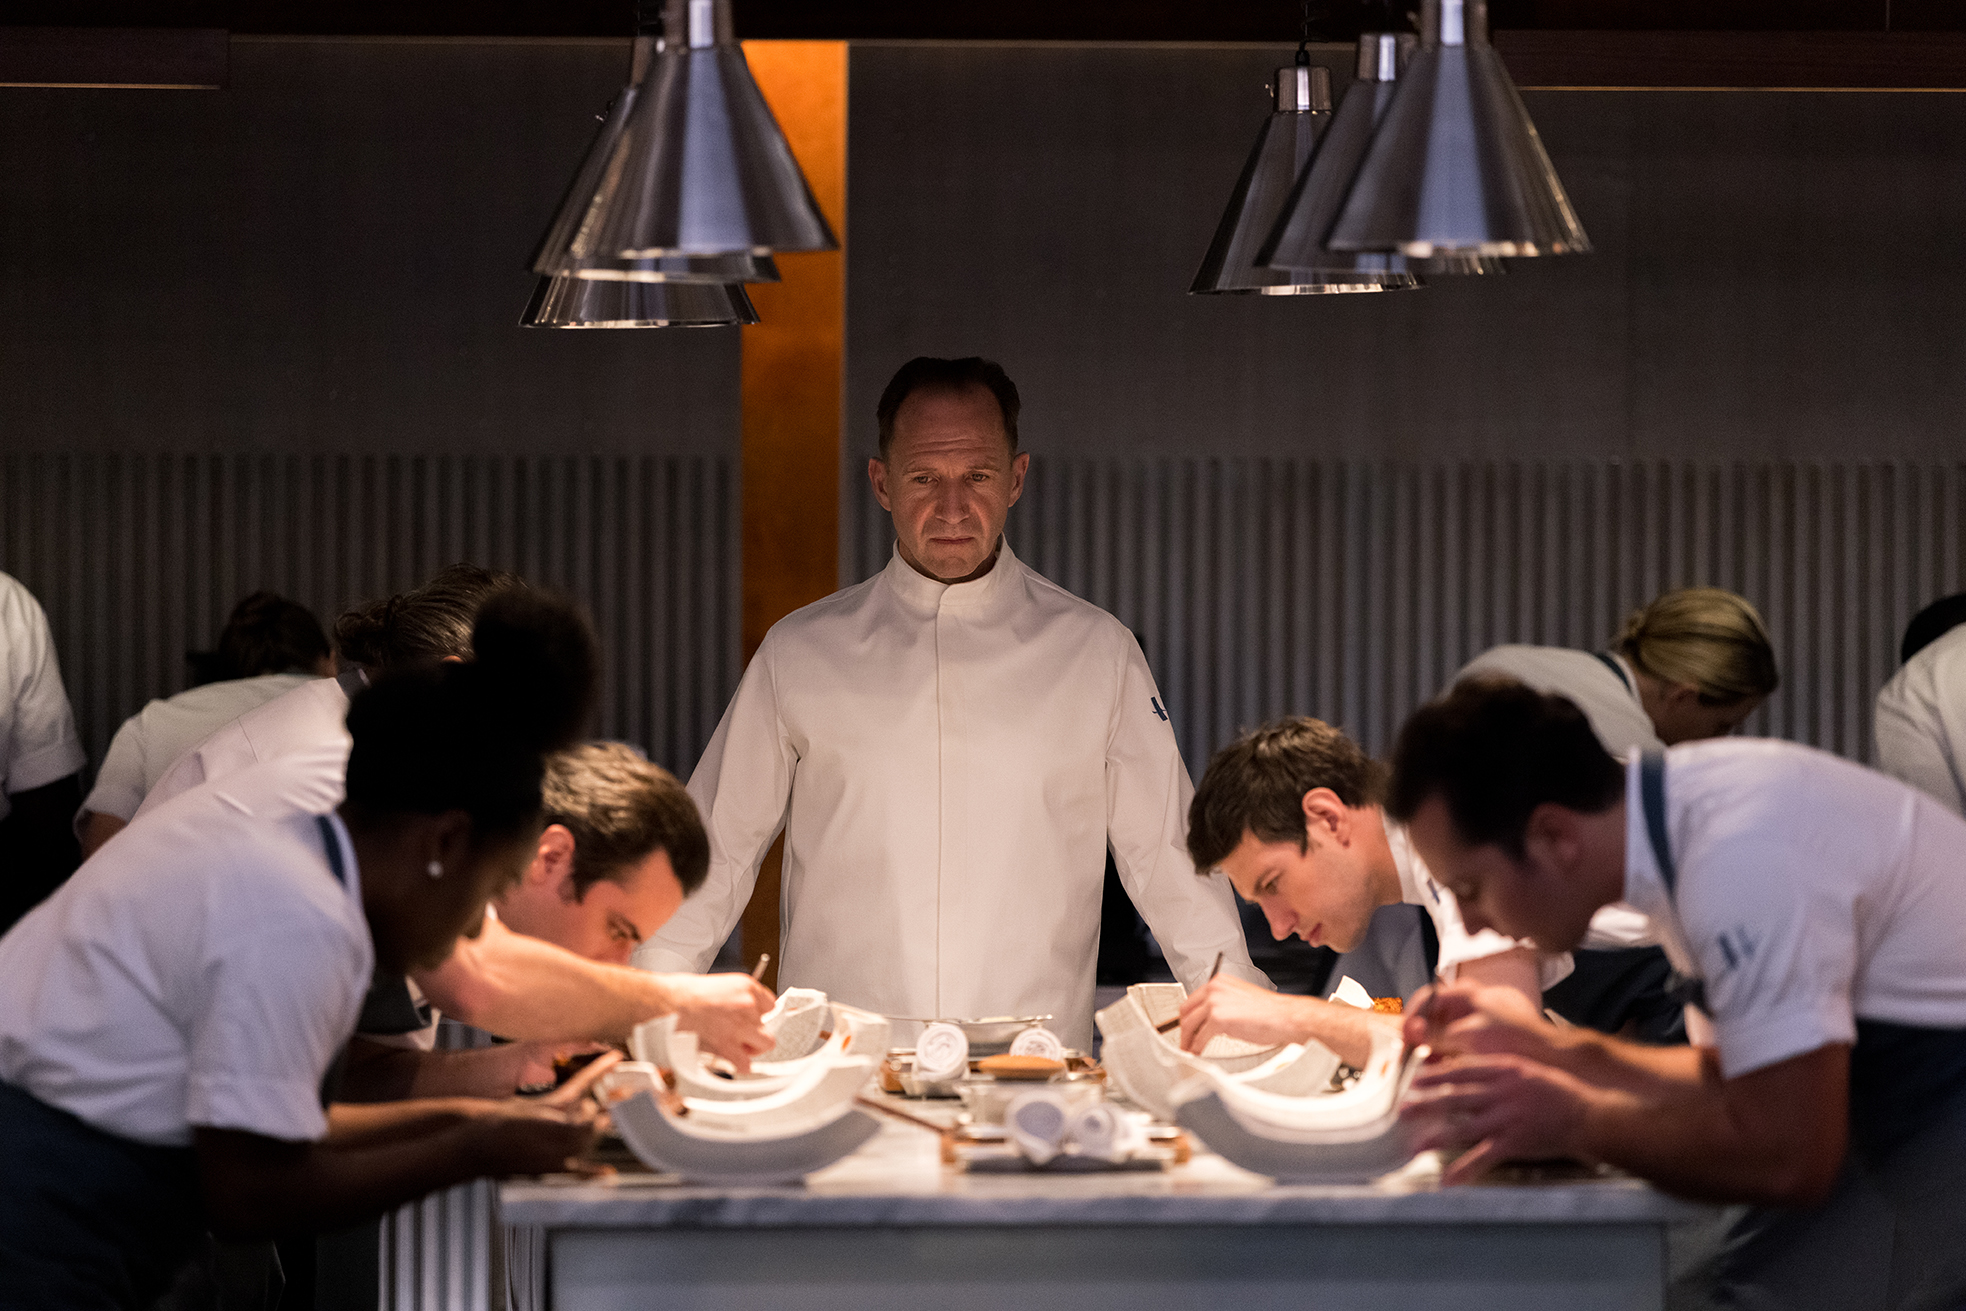 Ralph Fiennes in "The Menu" - among the 10 Best Movies of 2022